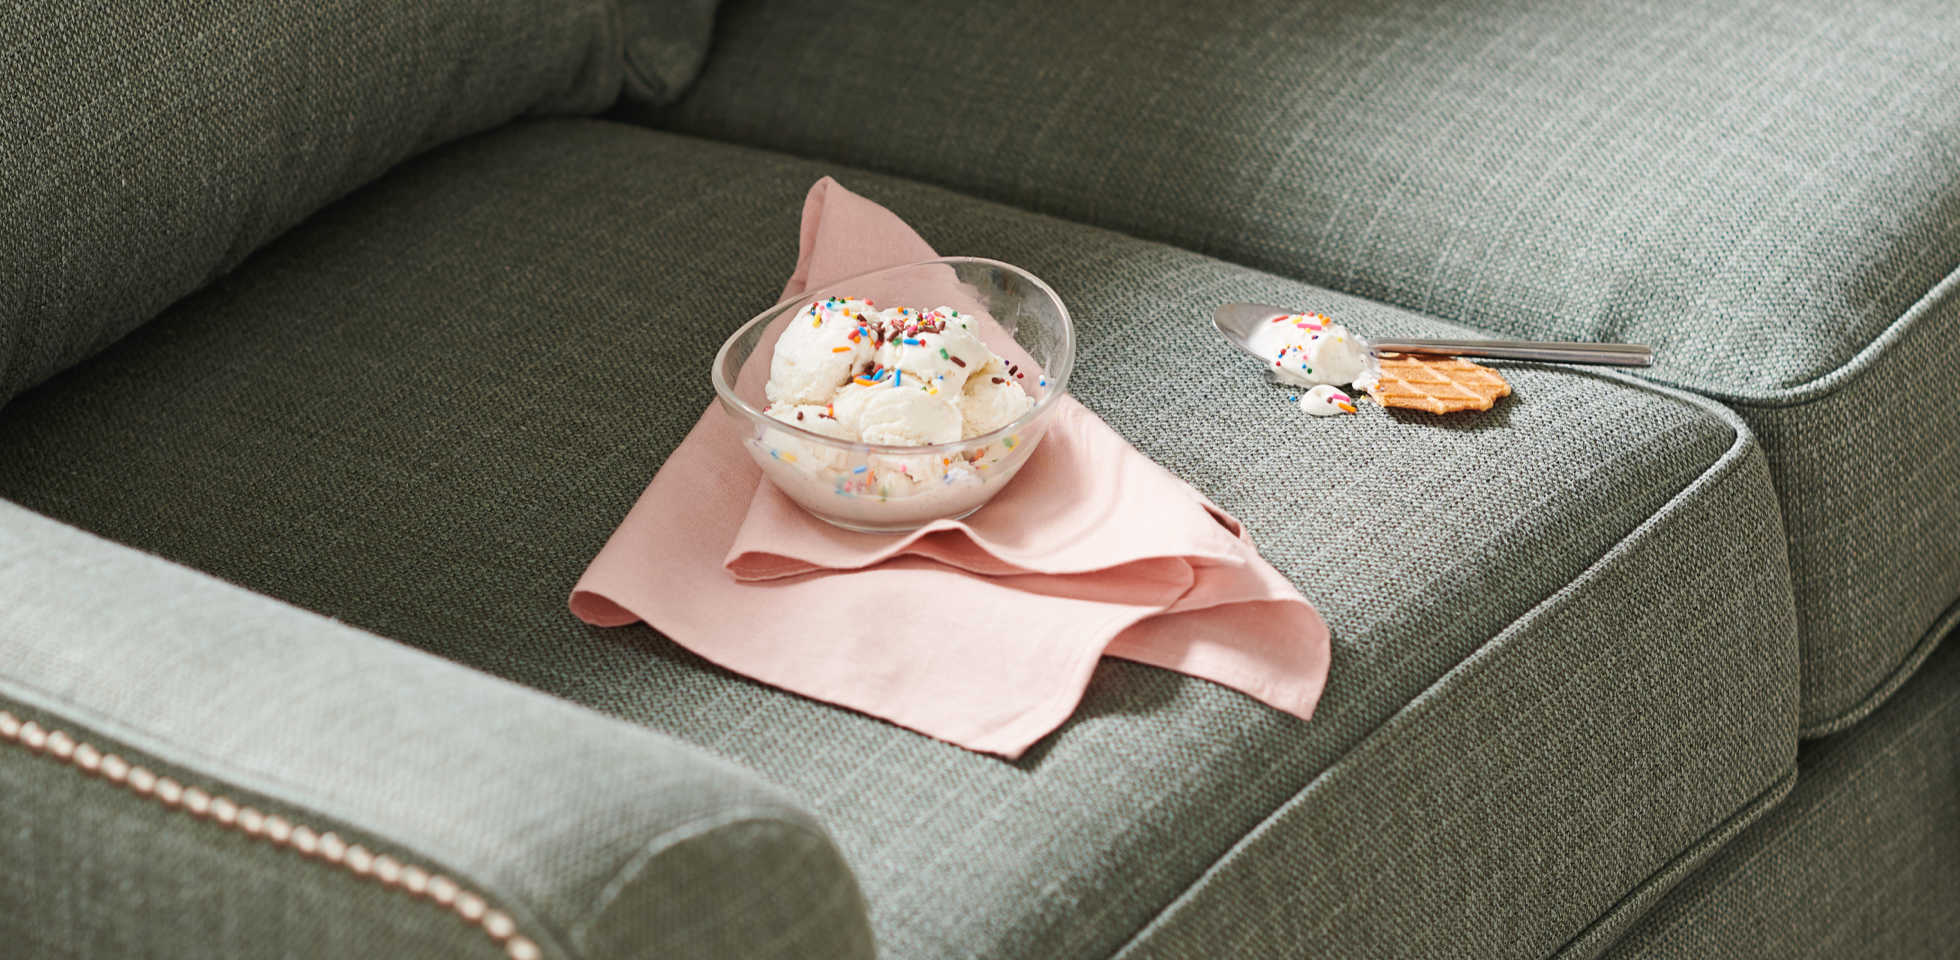 Bowl of ice cream on sofa with some spilled